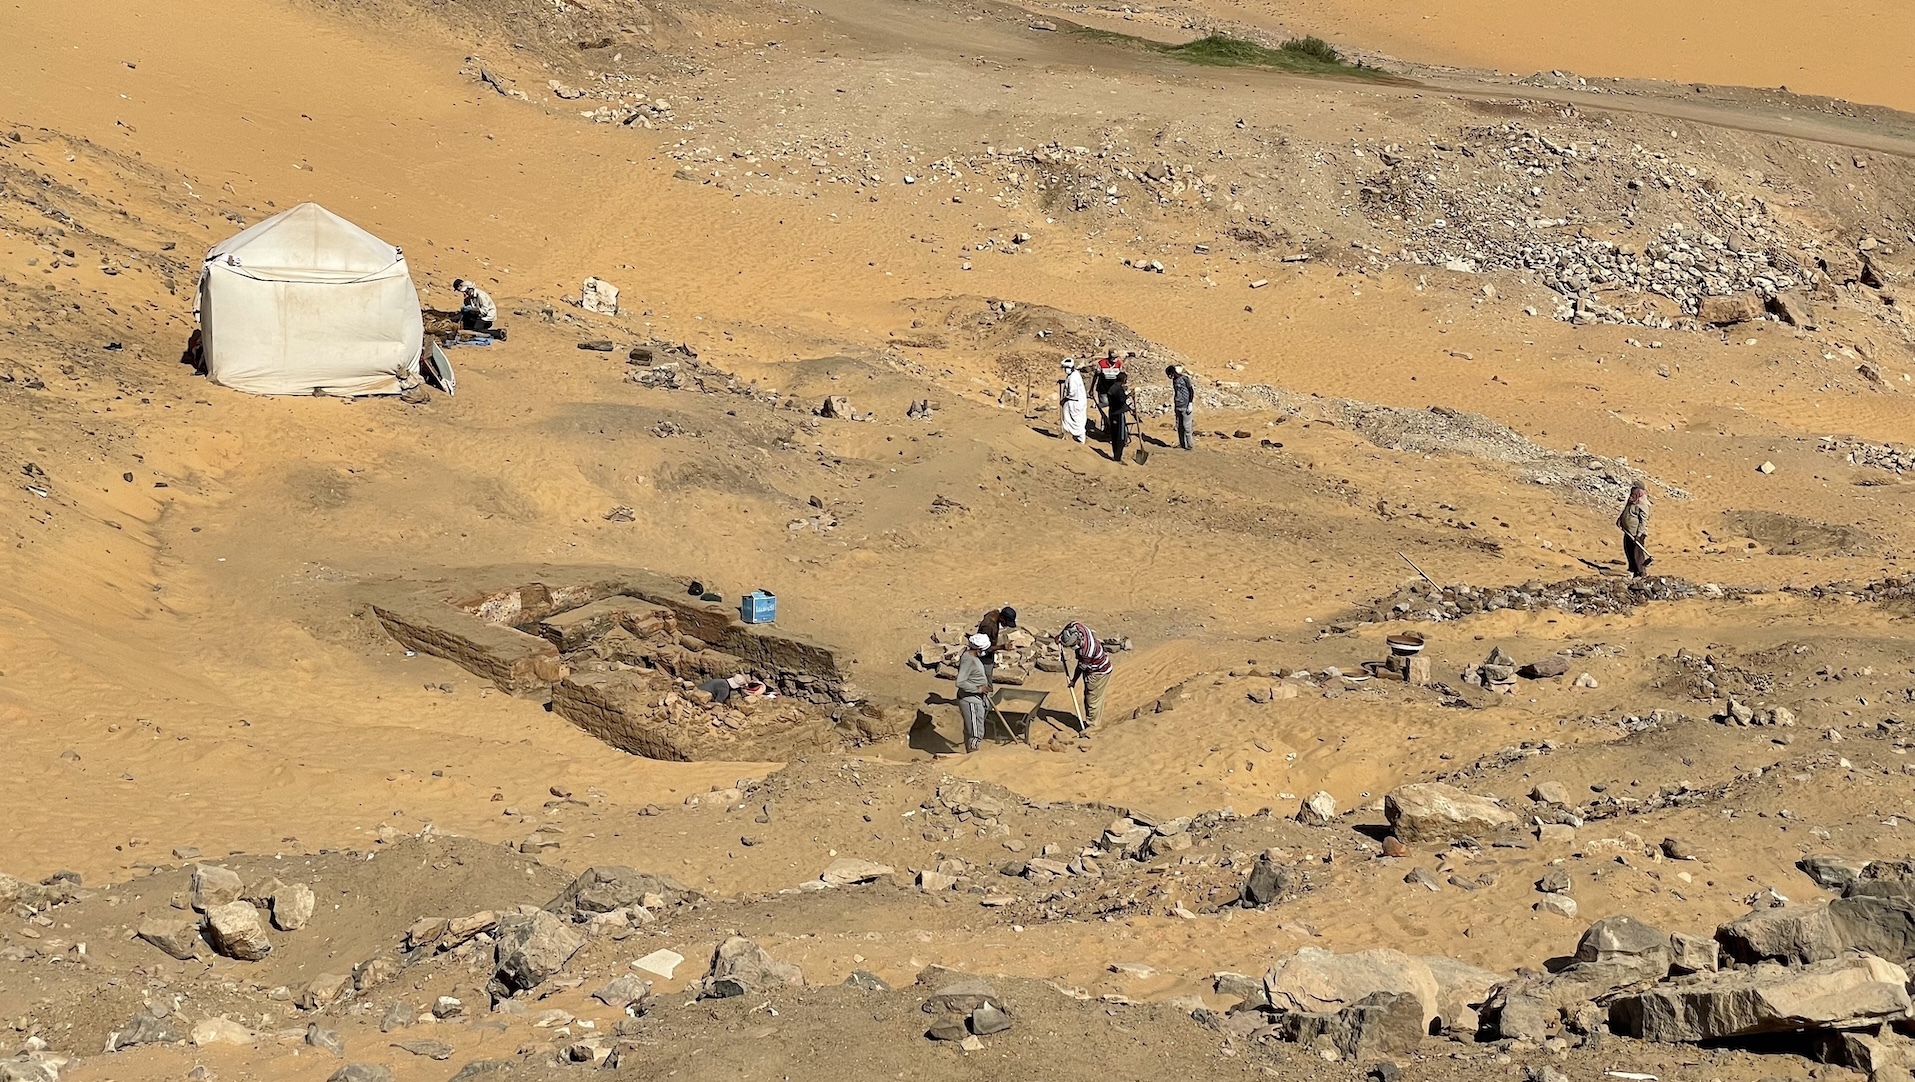 Archaeologists surveying the necropolis area on the hillside of Aswan.